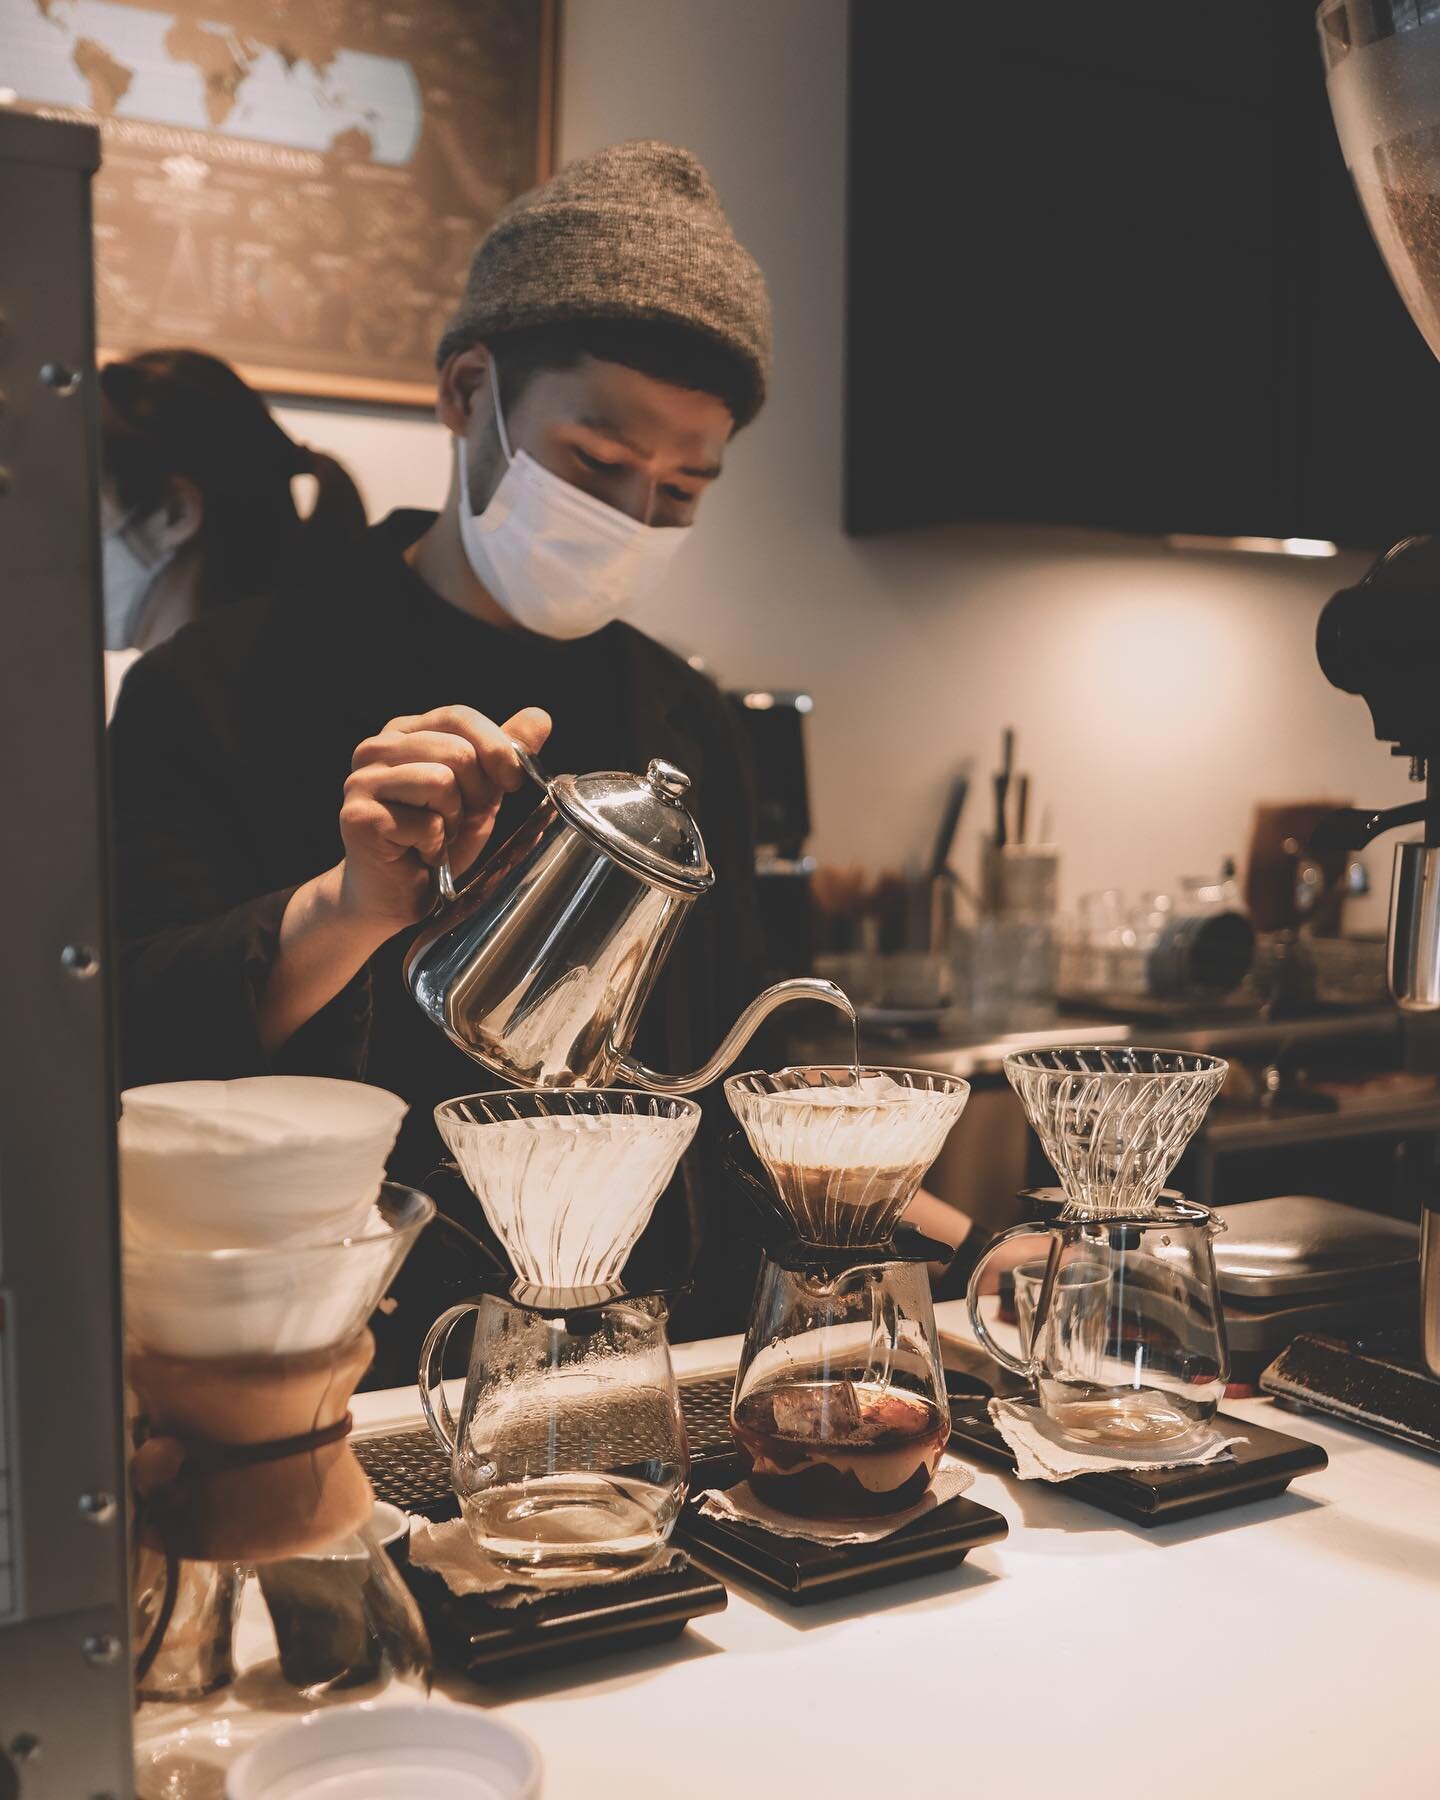 Some of the best beans in Osaka - drip or espresso! If you&rsquo;re doing a caffeinated tour of Kitahama, make sure you start your day here!

📍Kitahama, Osaka

Love drinking coffee and finding cool new cafes? Check out the coffee tours that I run in